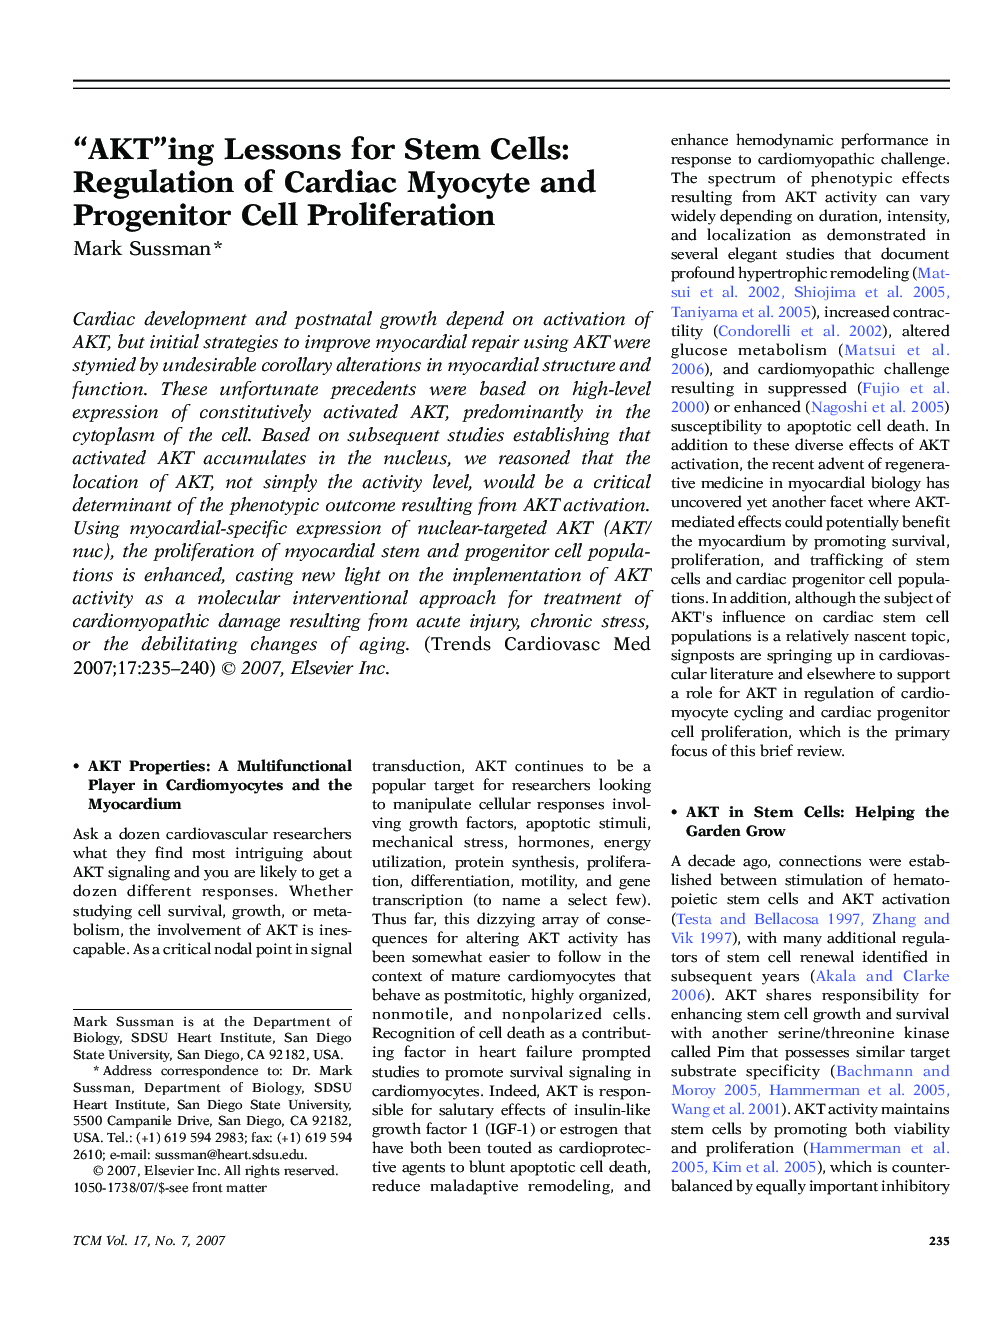 “AKT”ing Lessons for Stem Cells: Regulation of Cardiac Myocyte and Progenitor Cell Proliferation